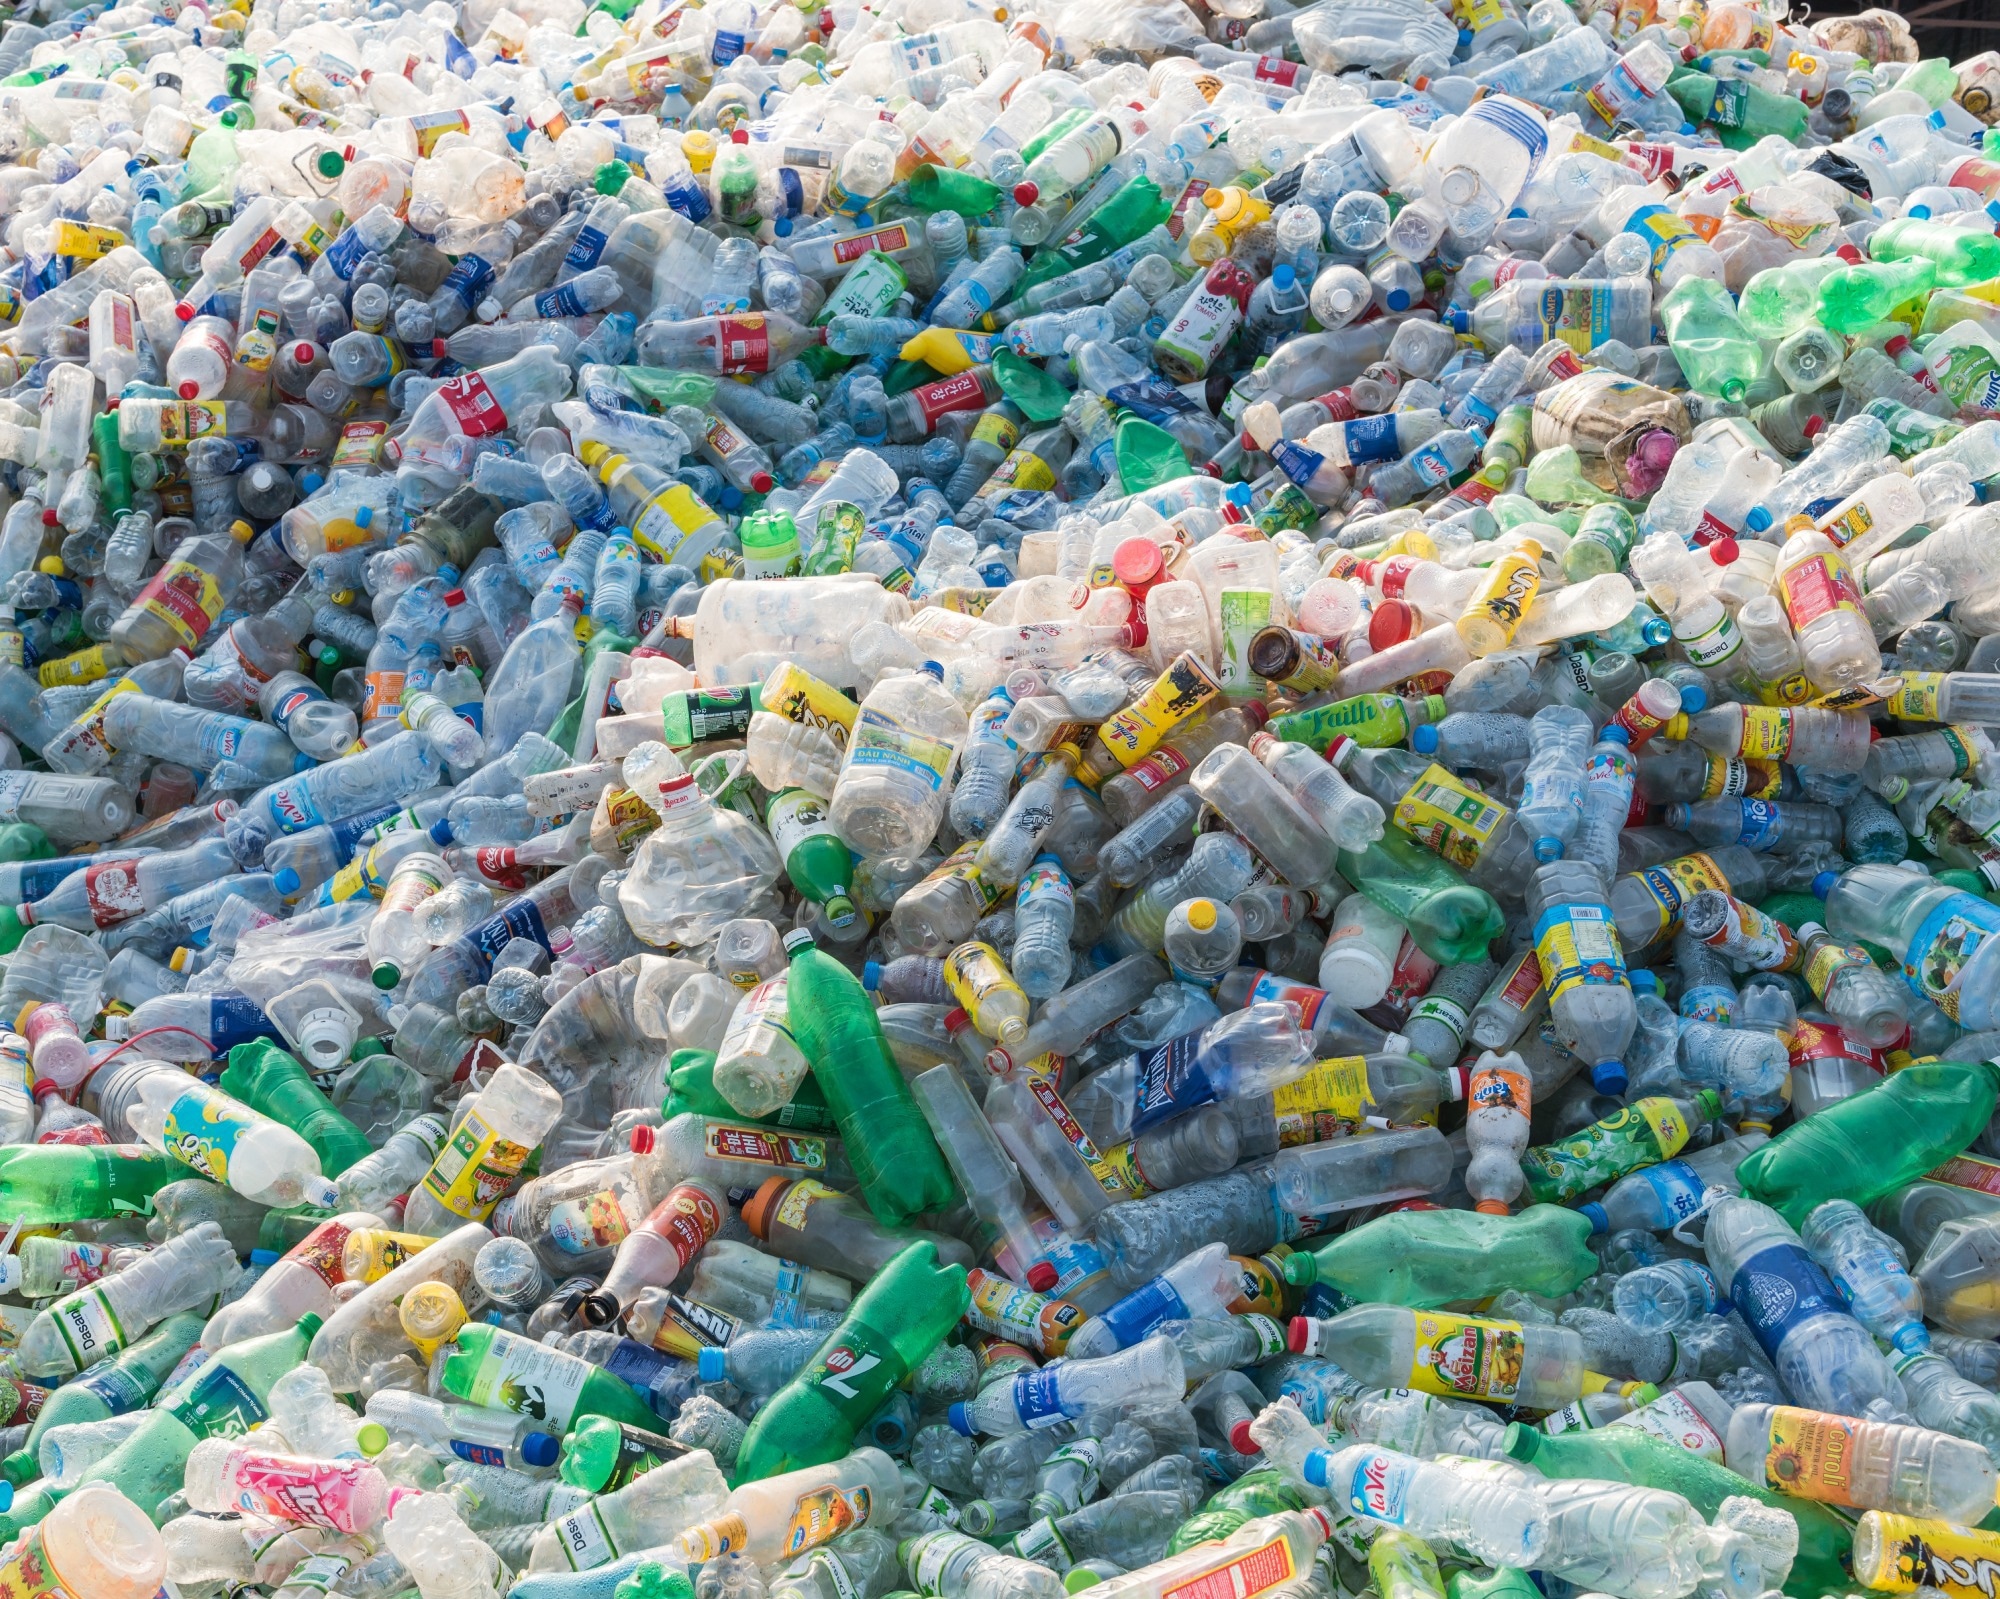 Study: Airborne microplastics: A narrative review of potential effects on the human respiratory system. Image Credit: Trong Nguyen / Shutterstock.com